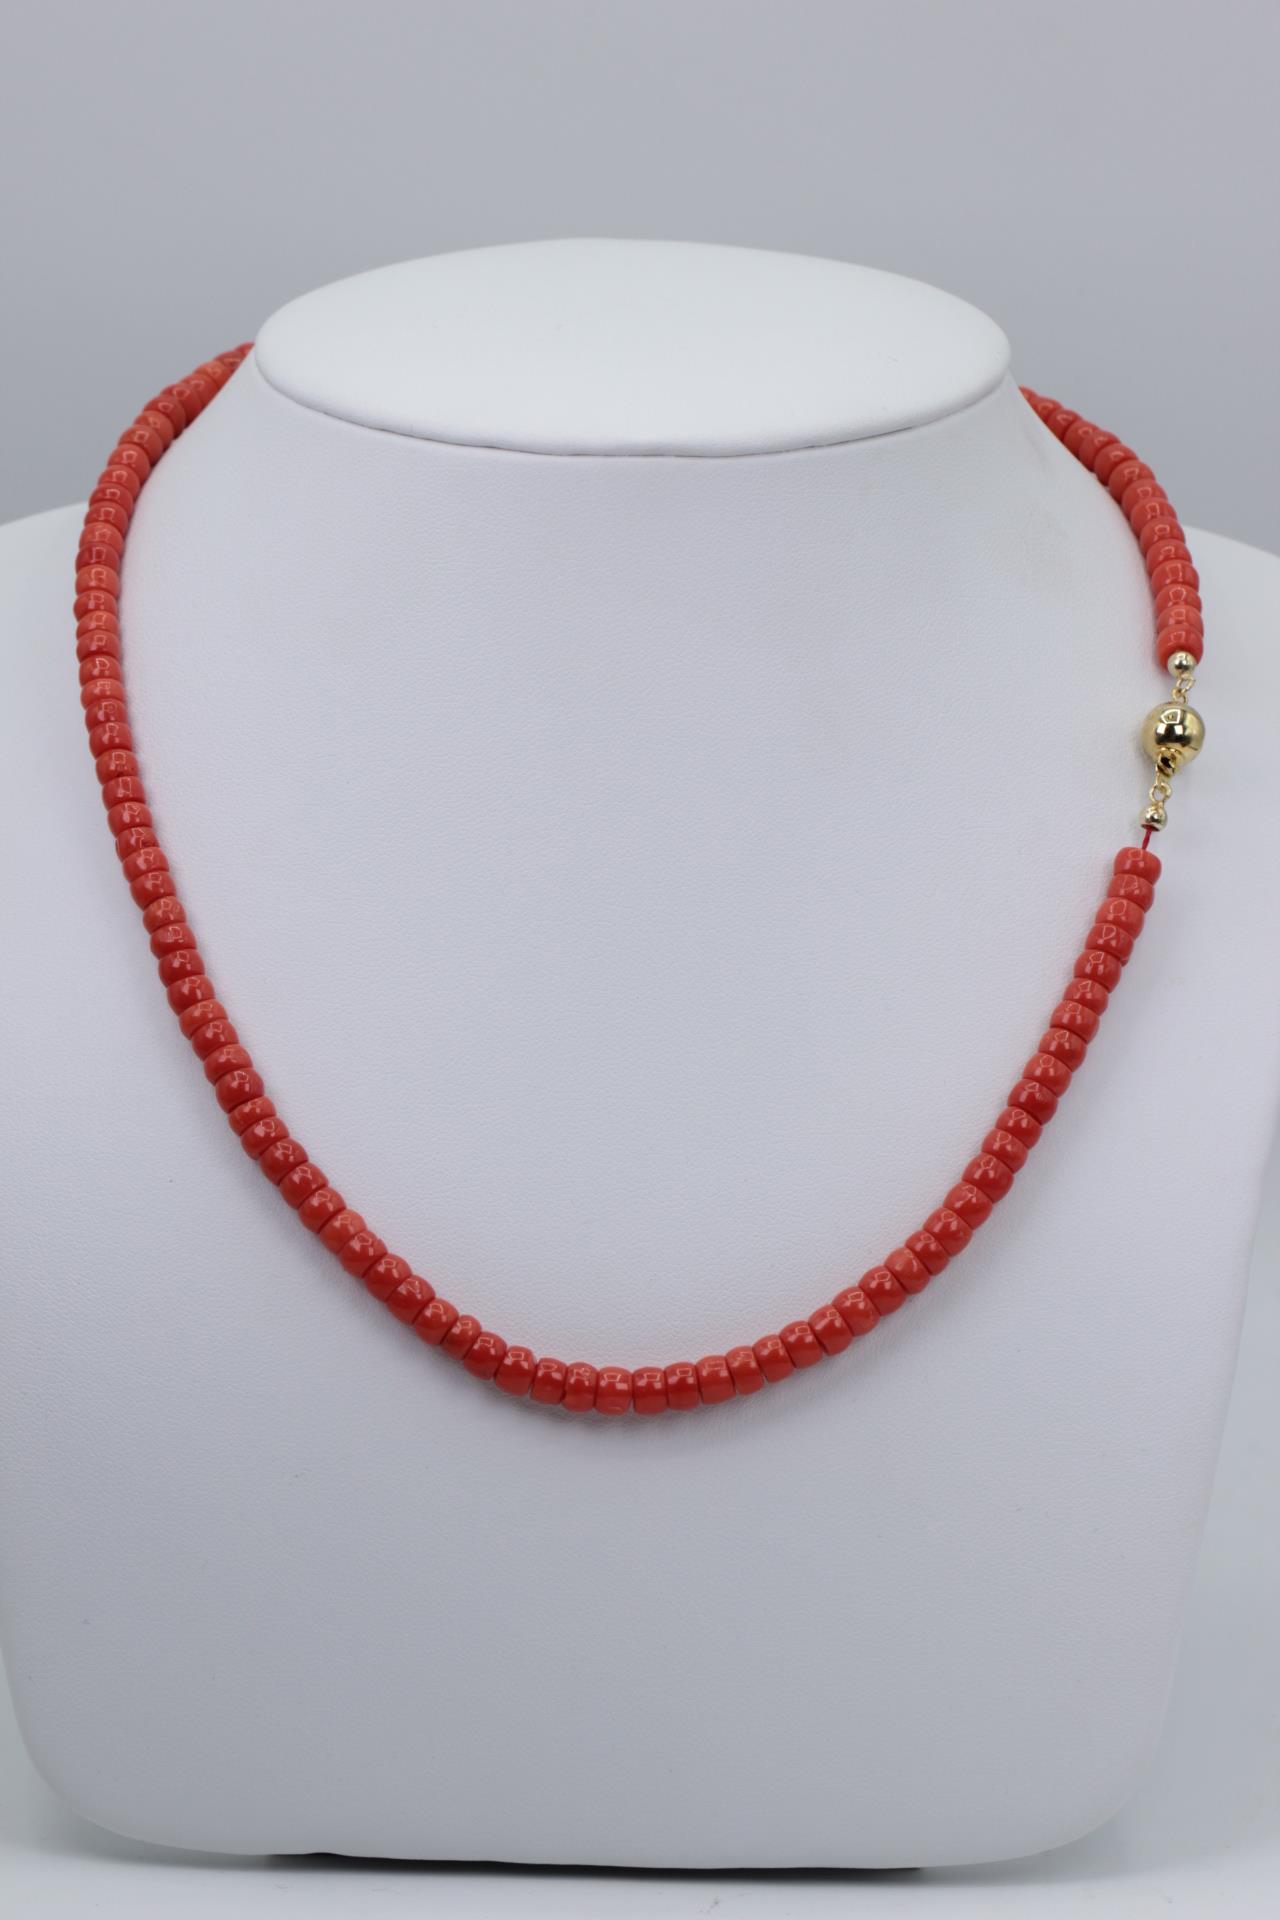 Coral necklace with gold ball clasp